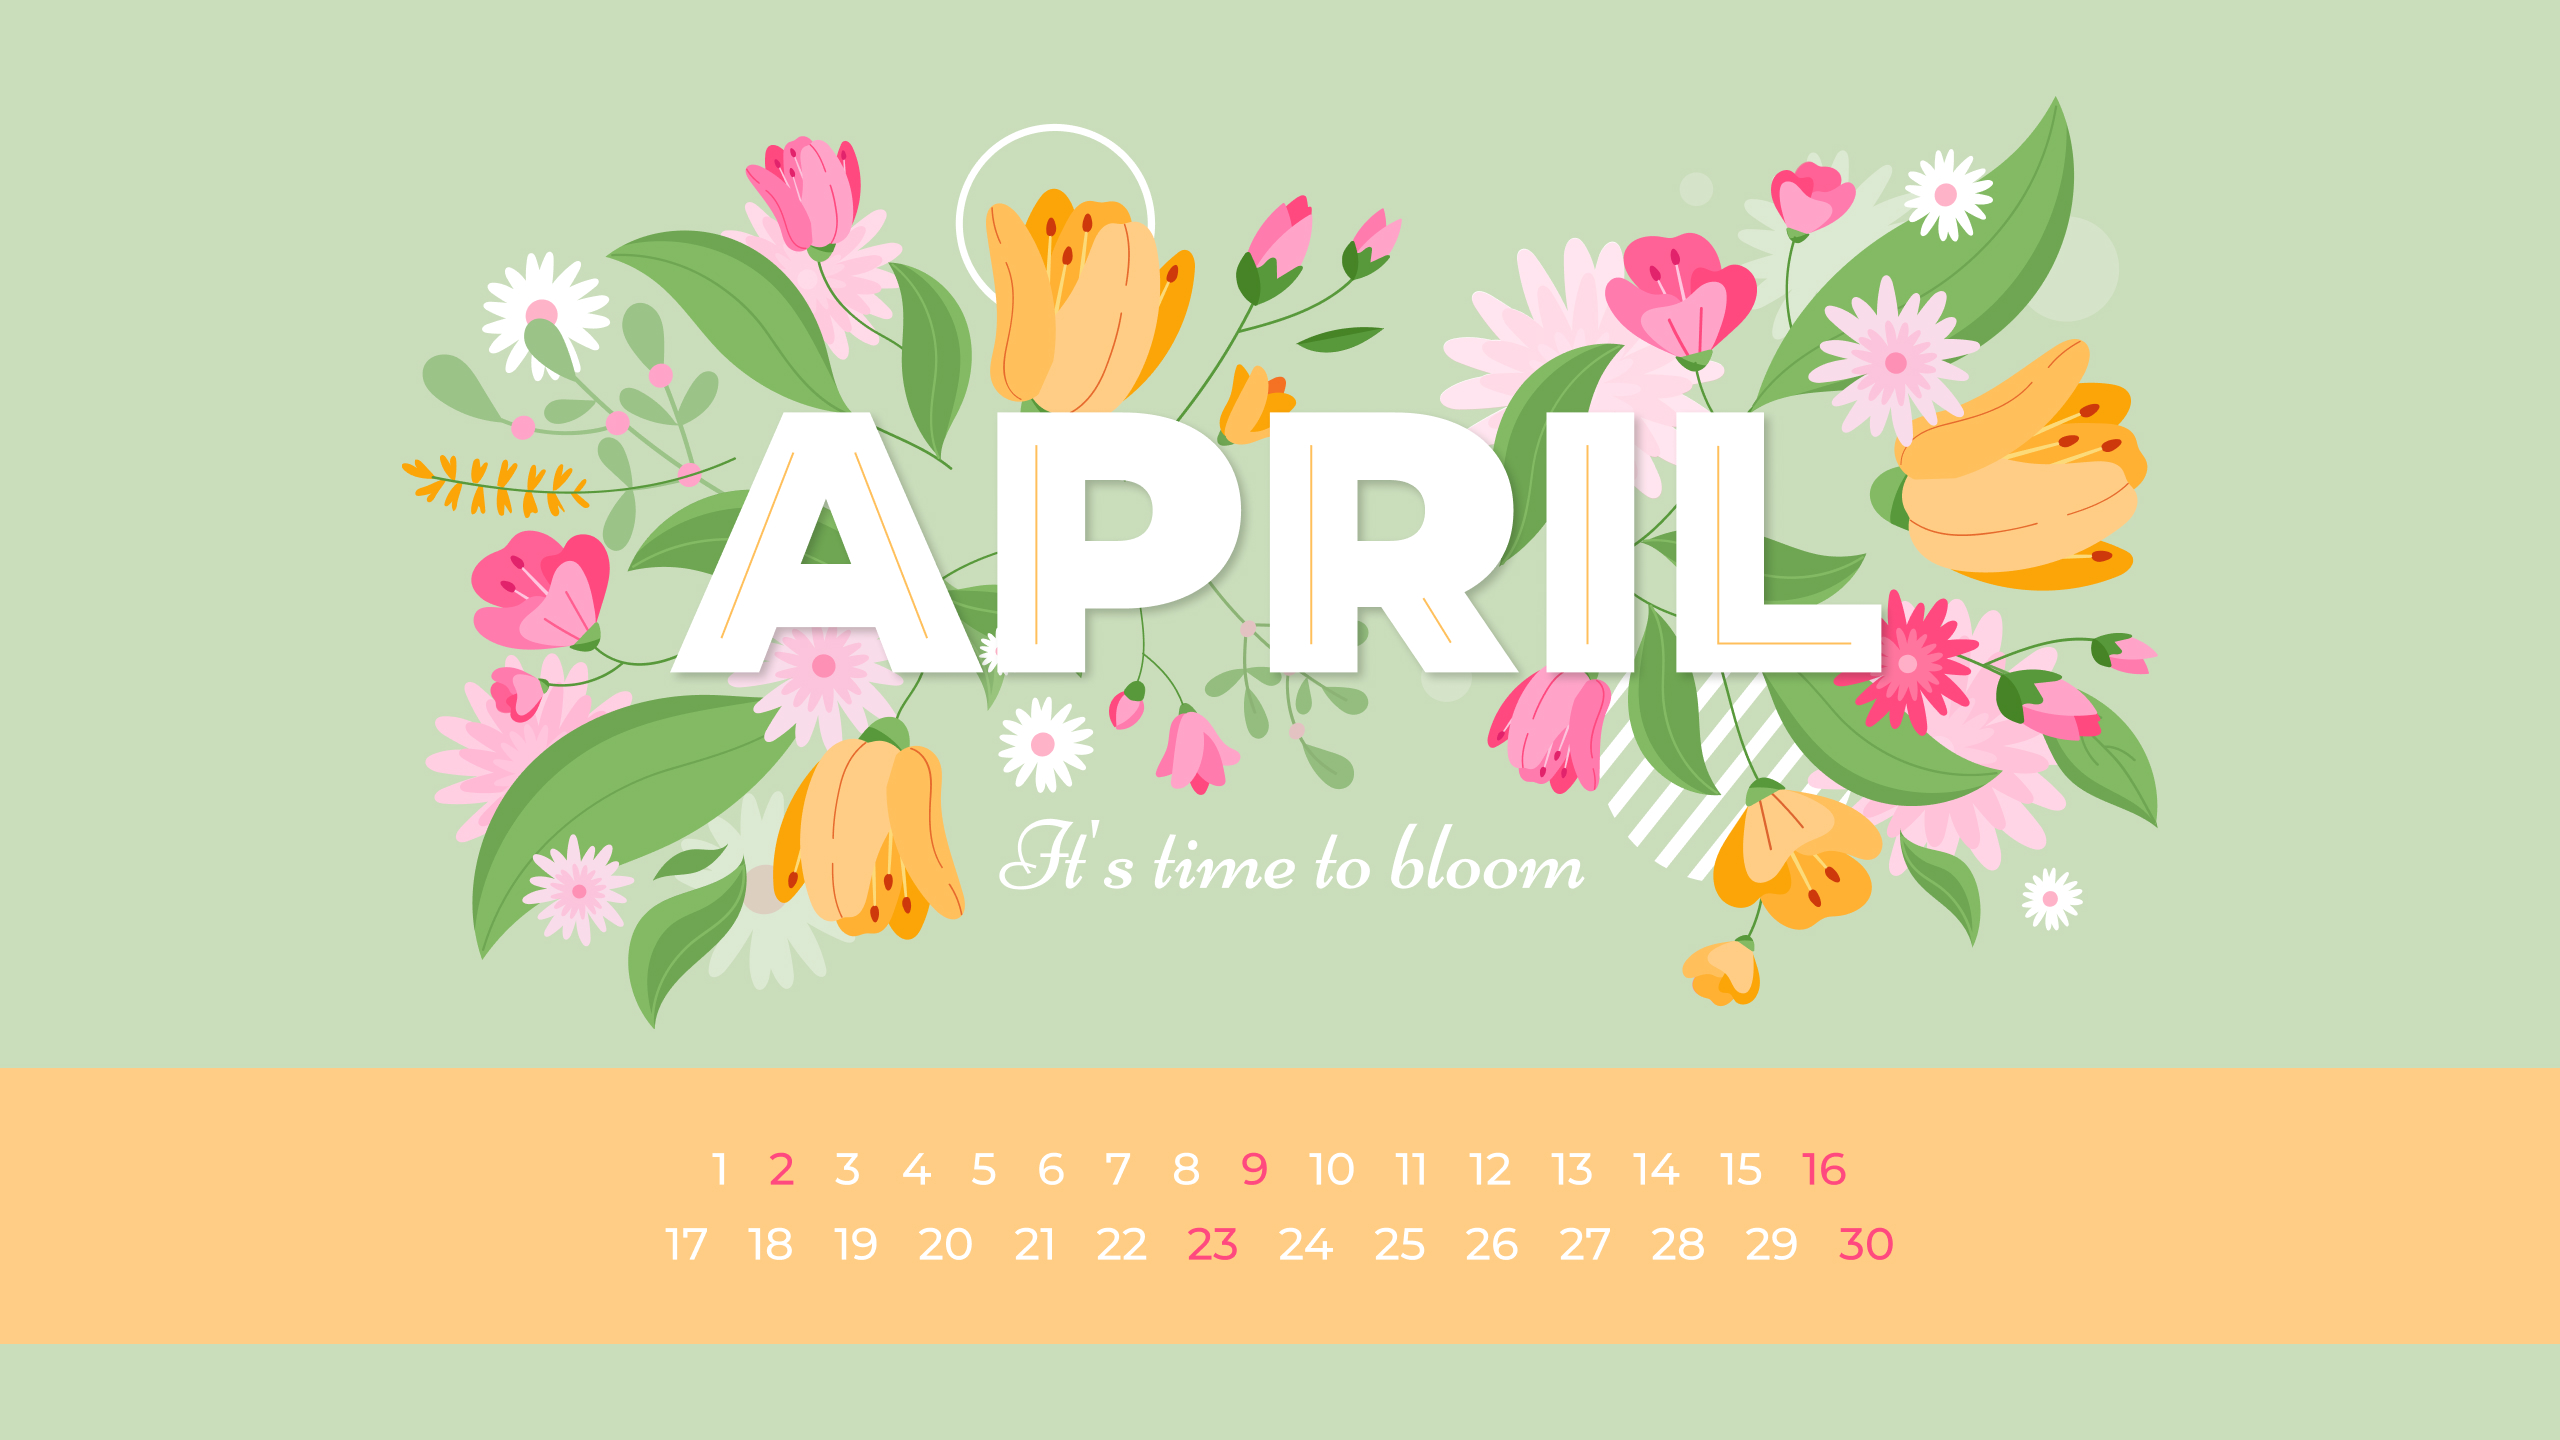 Calendar with flowers and the word april on it.